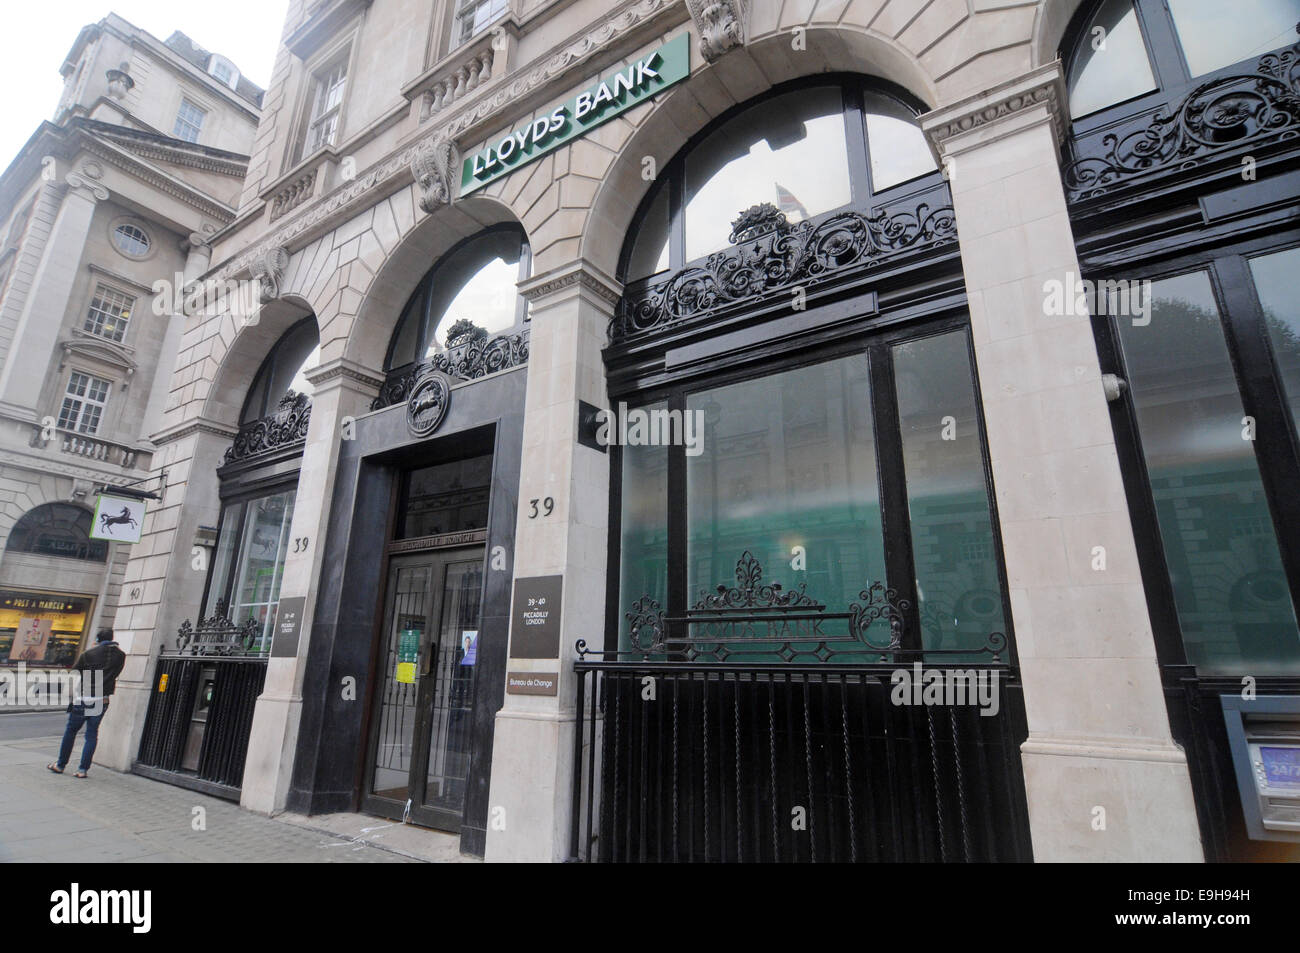 London, UK. 28th October, 2014. 9,000 jobs to go at Lloyds Bank as taxpayer backed bank cuts a tenth of its workforce and shuts 150 branches as it says more people bank online. Credit:  JOHNNY ARMSTEAD/Alamy Live News Stock Photo